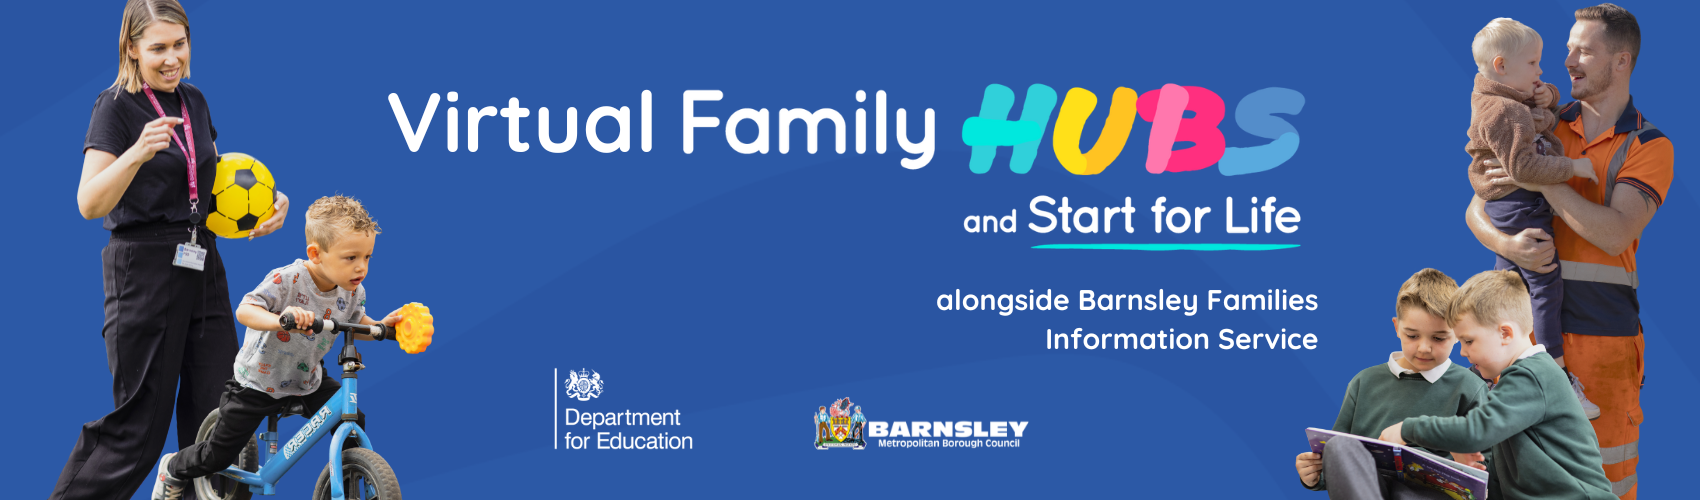 Family Services Directory